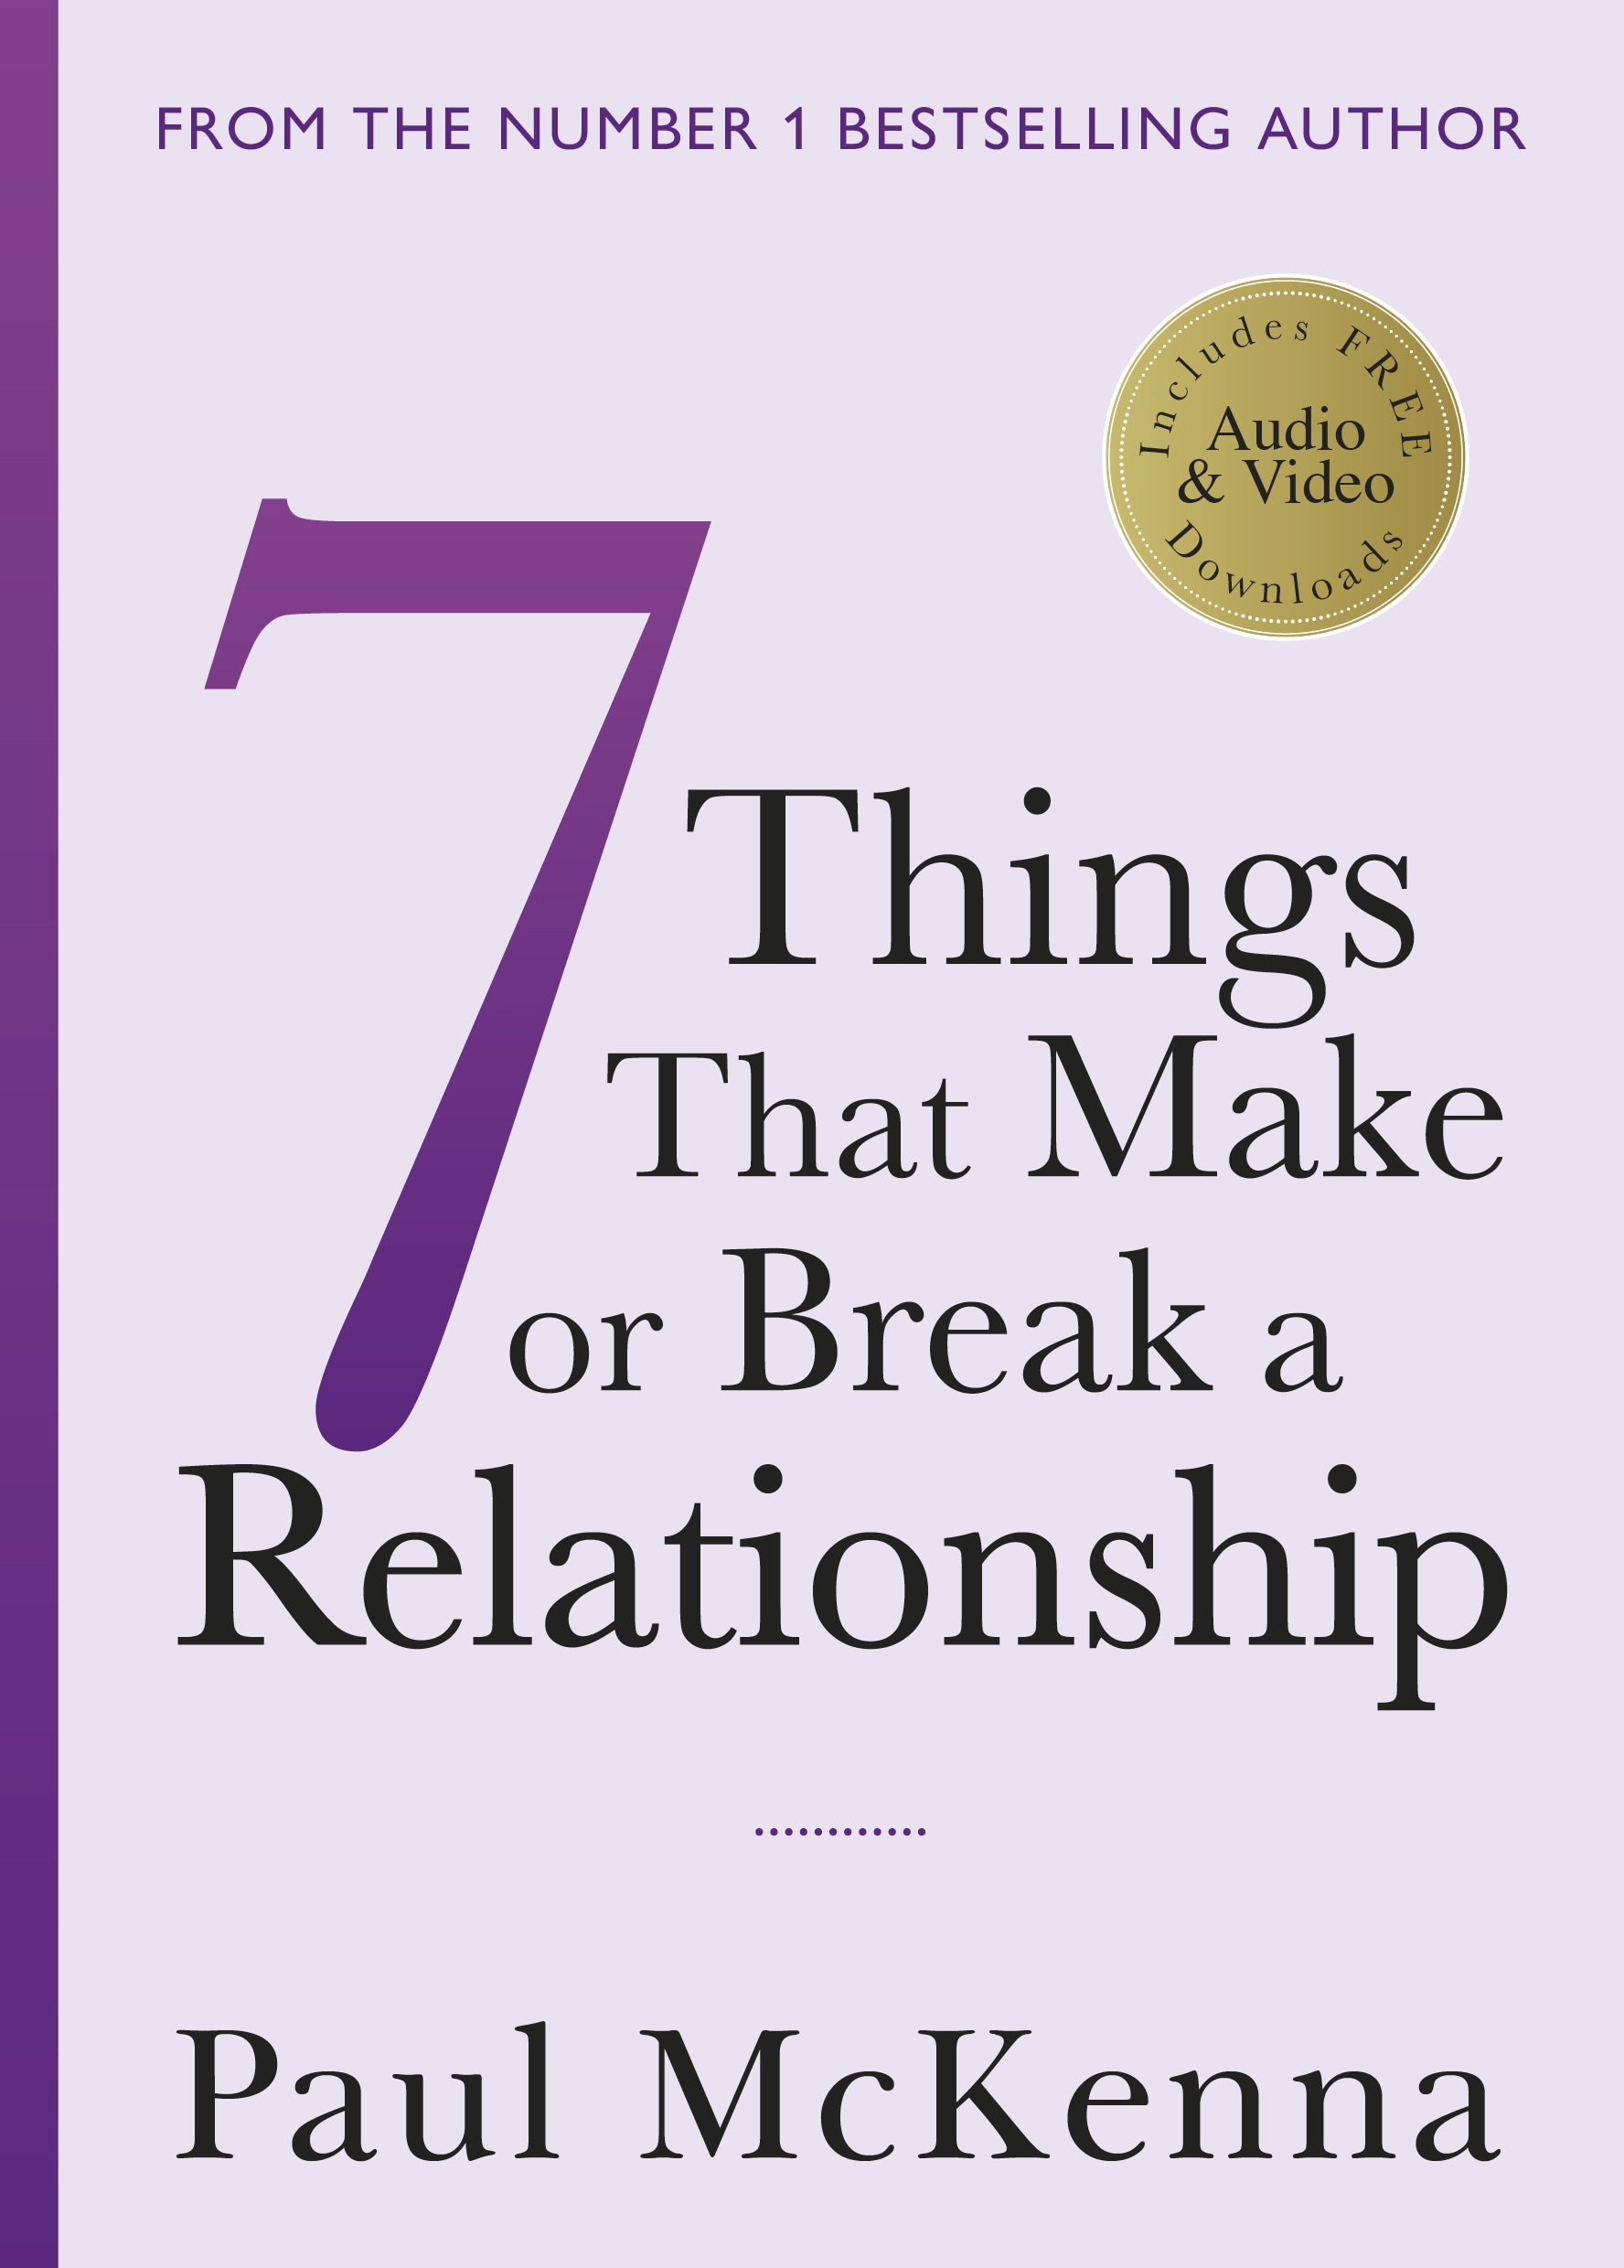 Book “Seven Things That Make or Break a Relationship” by Paul McKenna — February 13, 2020